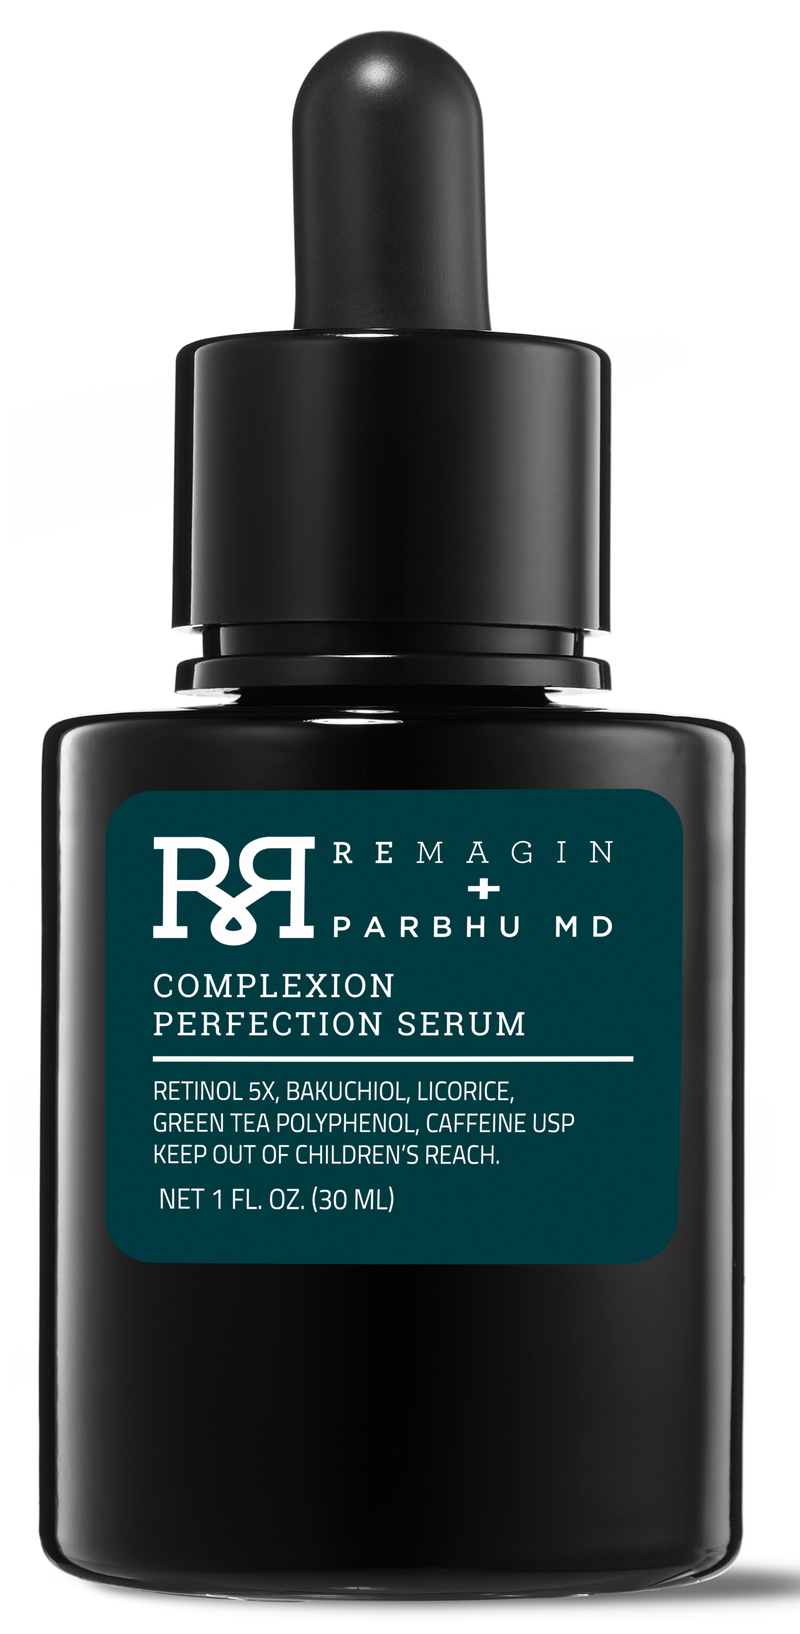 COMPLEXION PERFECTION SERUM